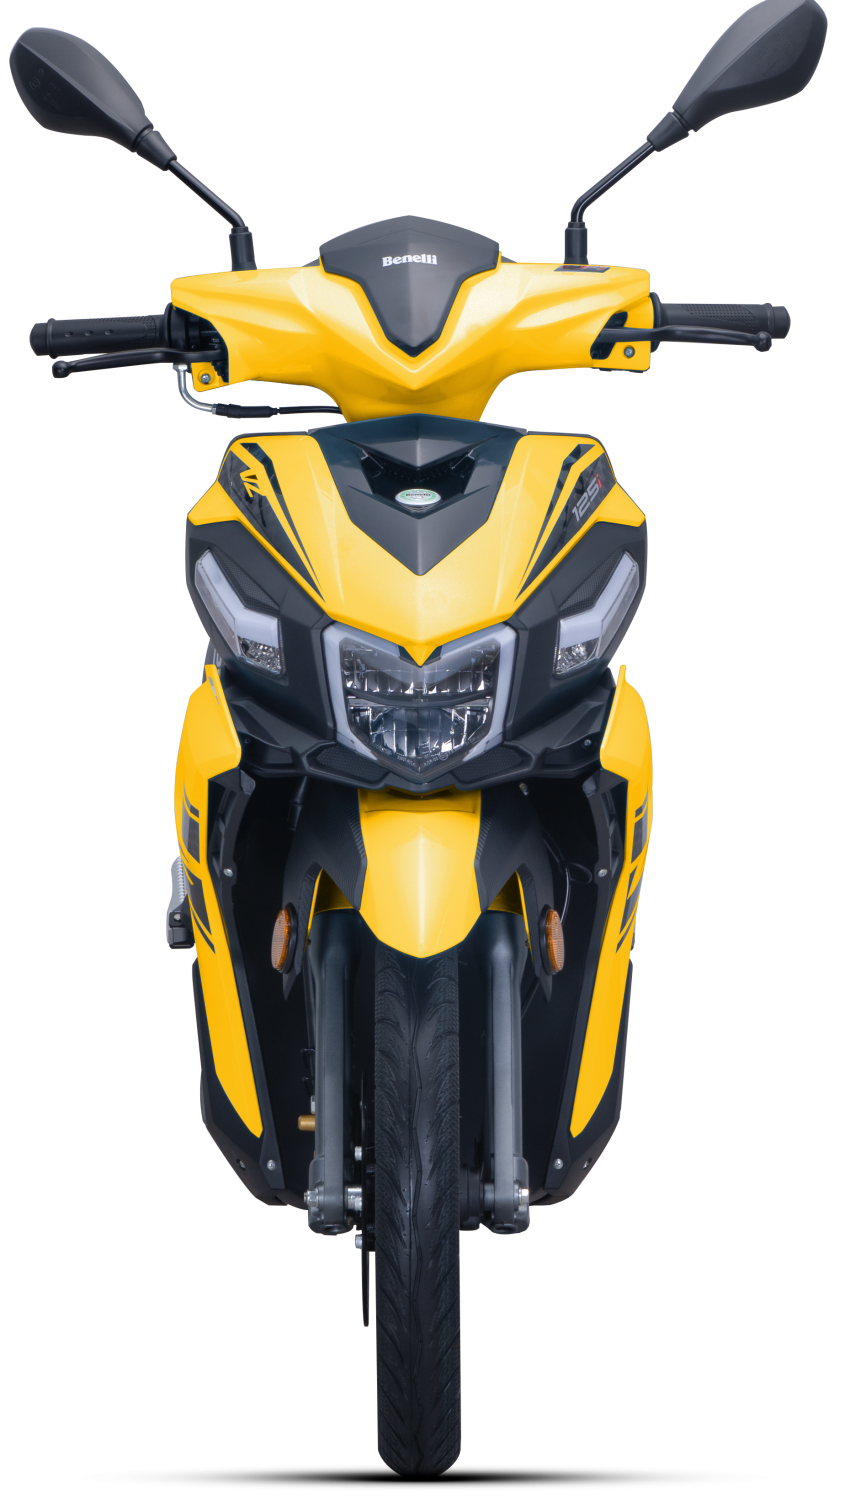 2022 Benelli VZ125i updated for Malaysia, RM5,838 1390663